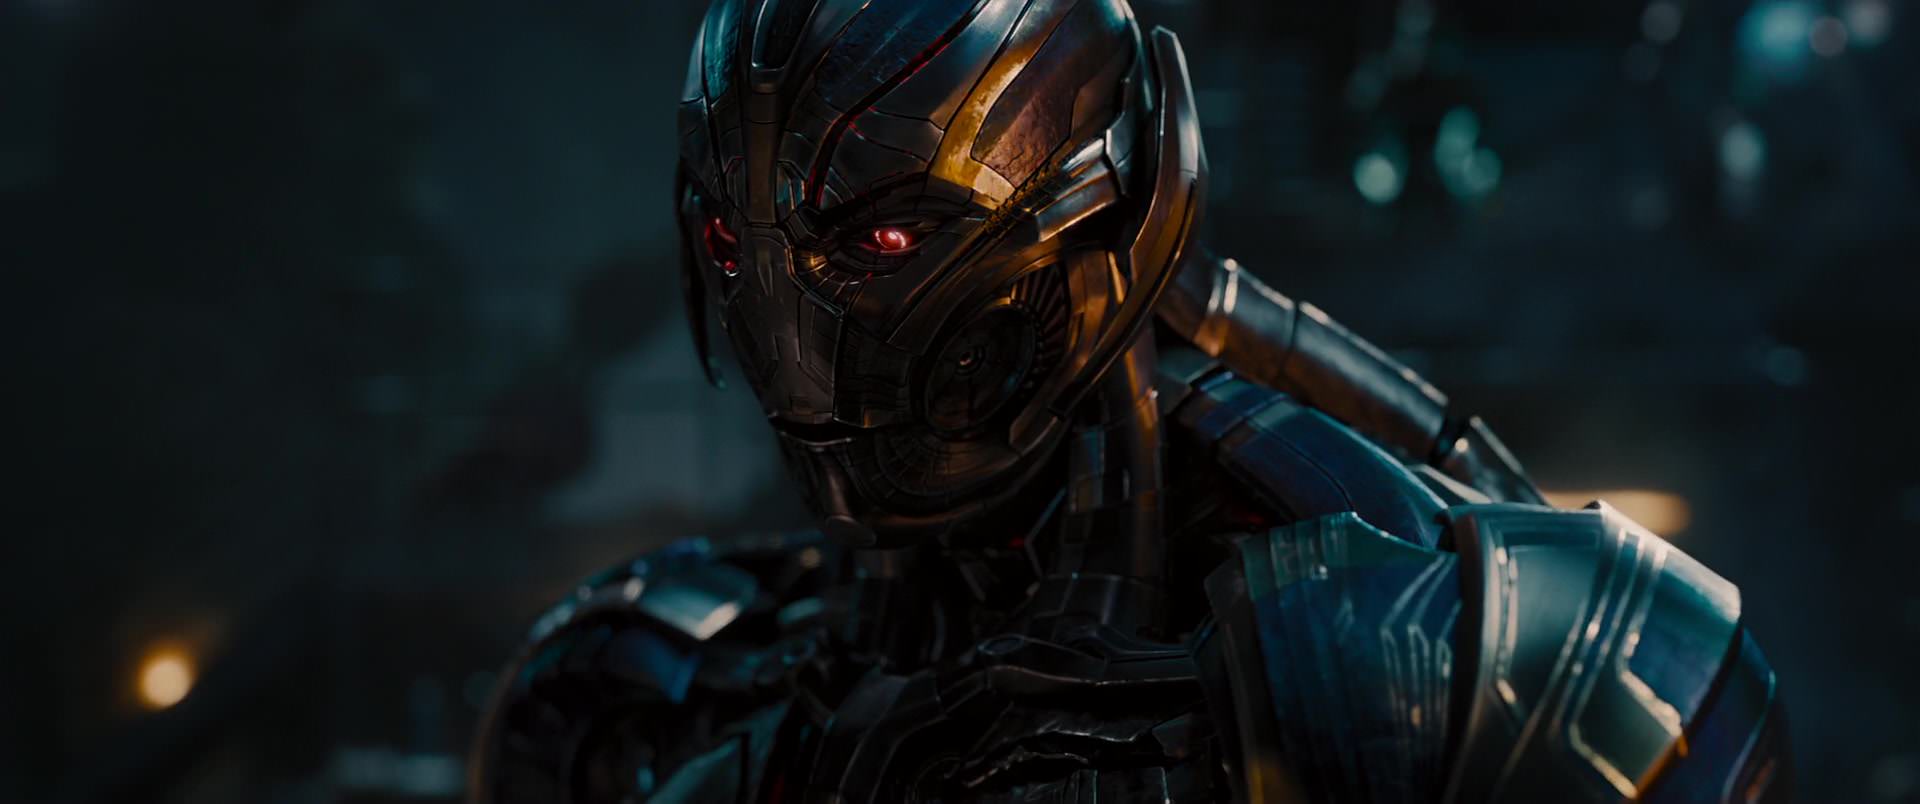 avengers age of ultron full movie in hindi download 480p filmyzilla